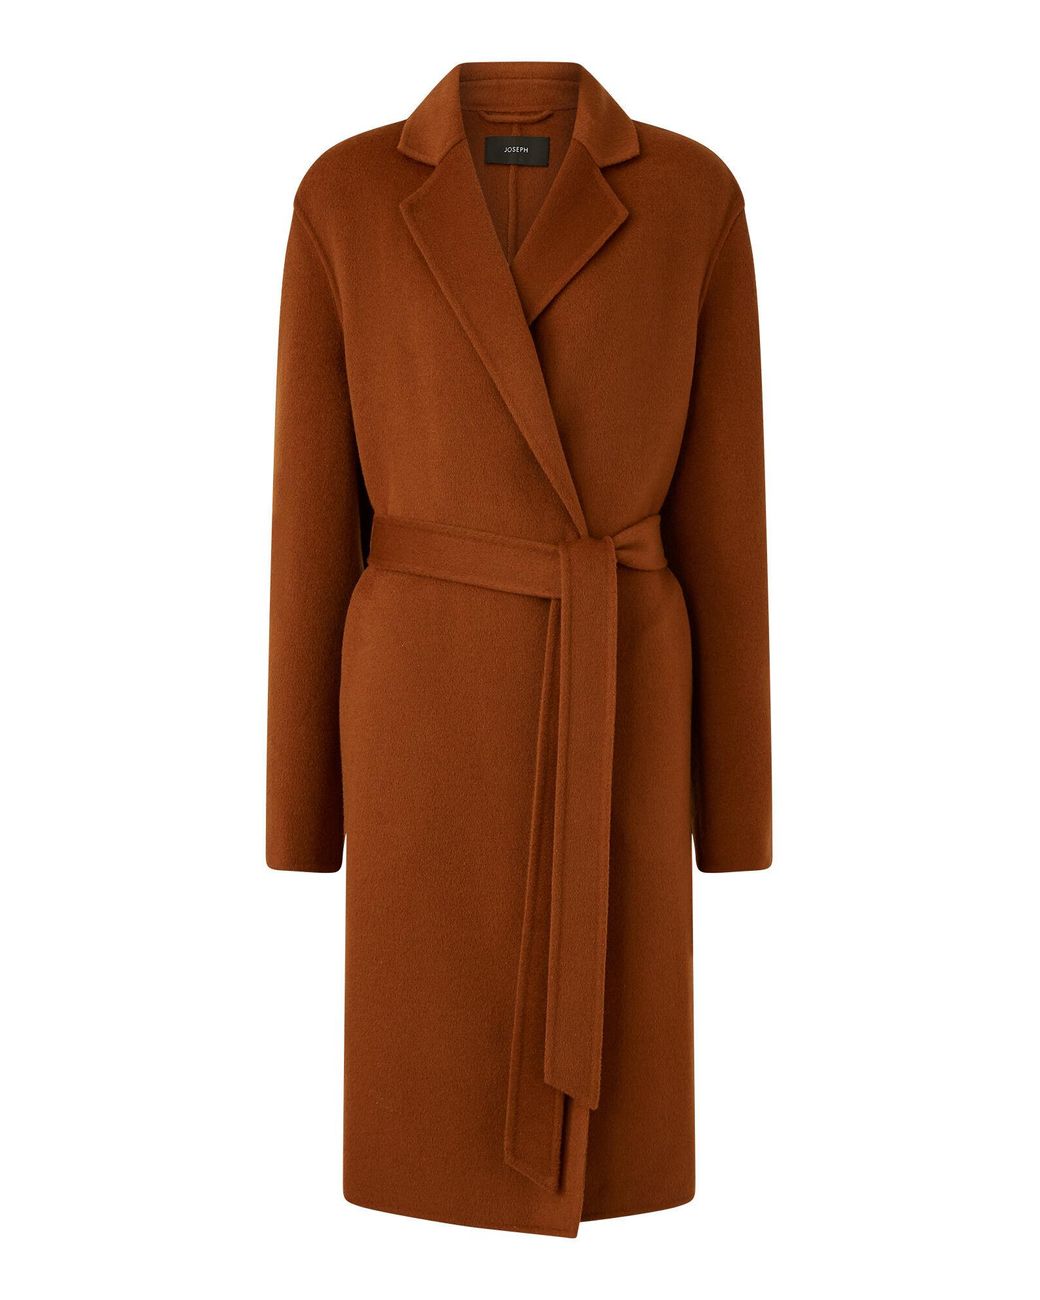 JOSEPH Cenda Long Double Face Cashmere Coat in Ivory (Brown) - Lyst